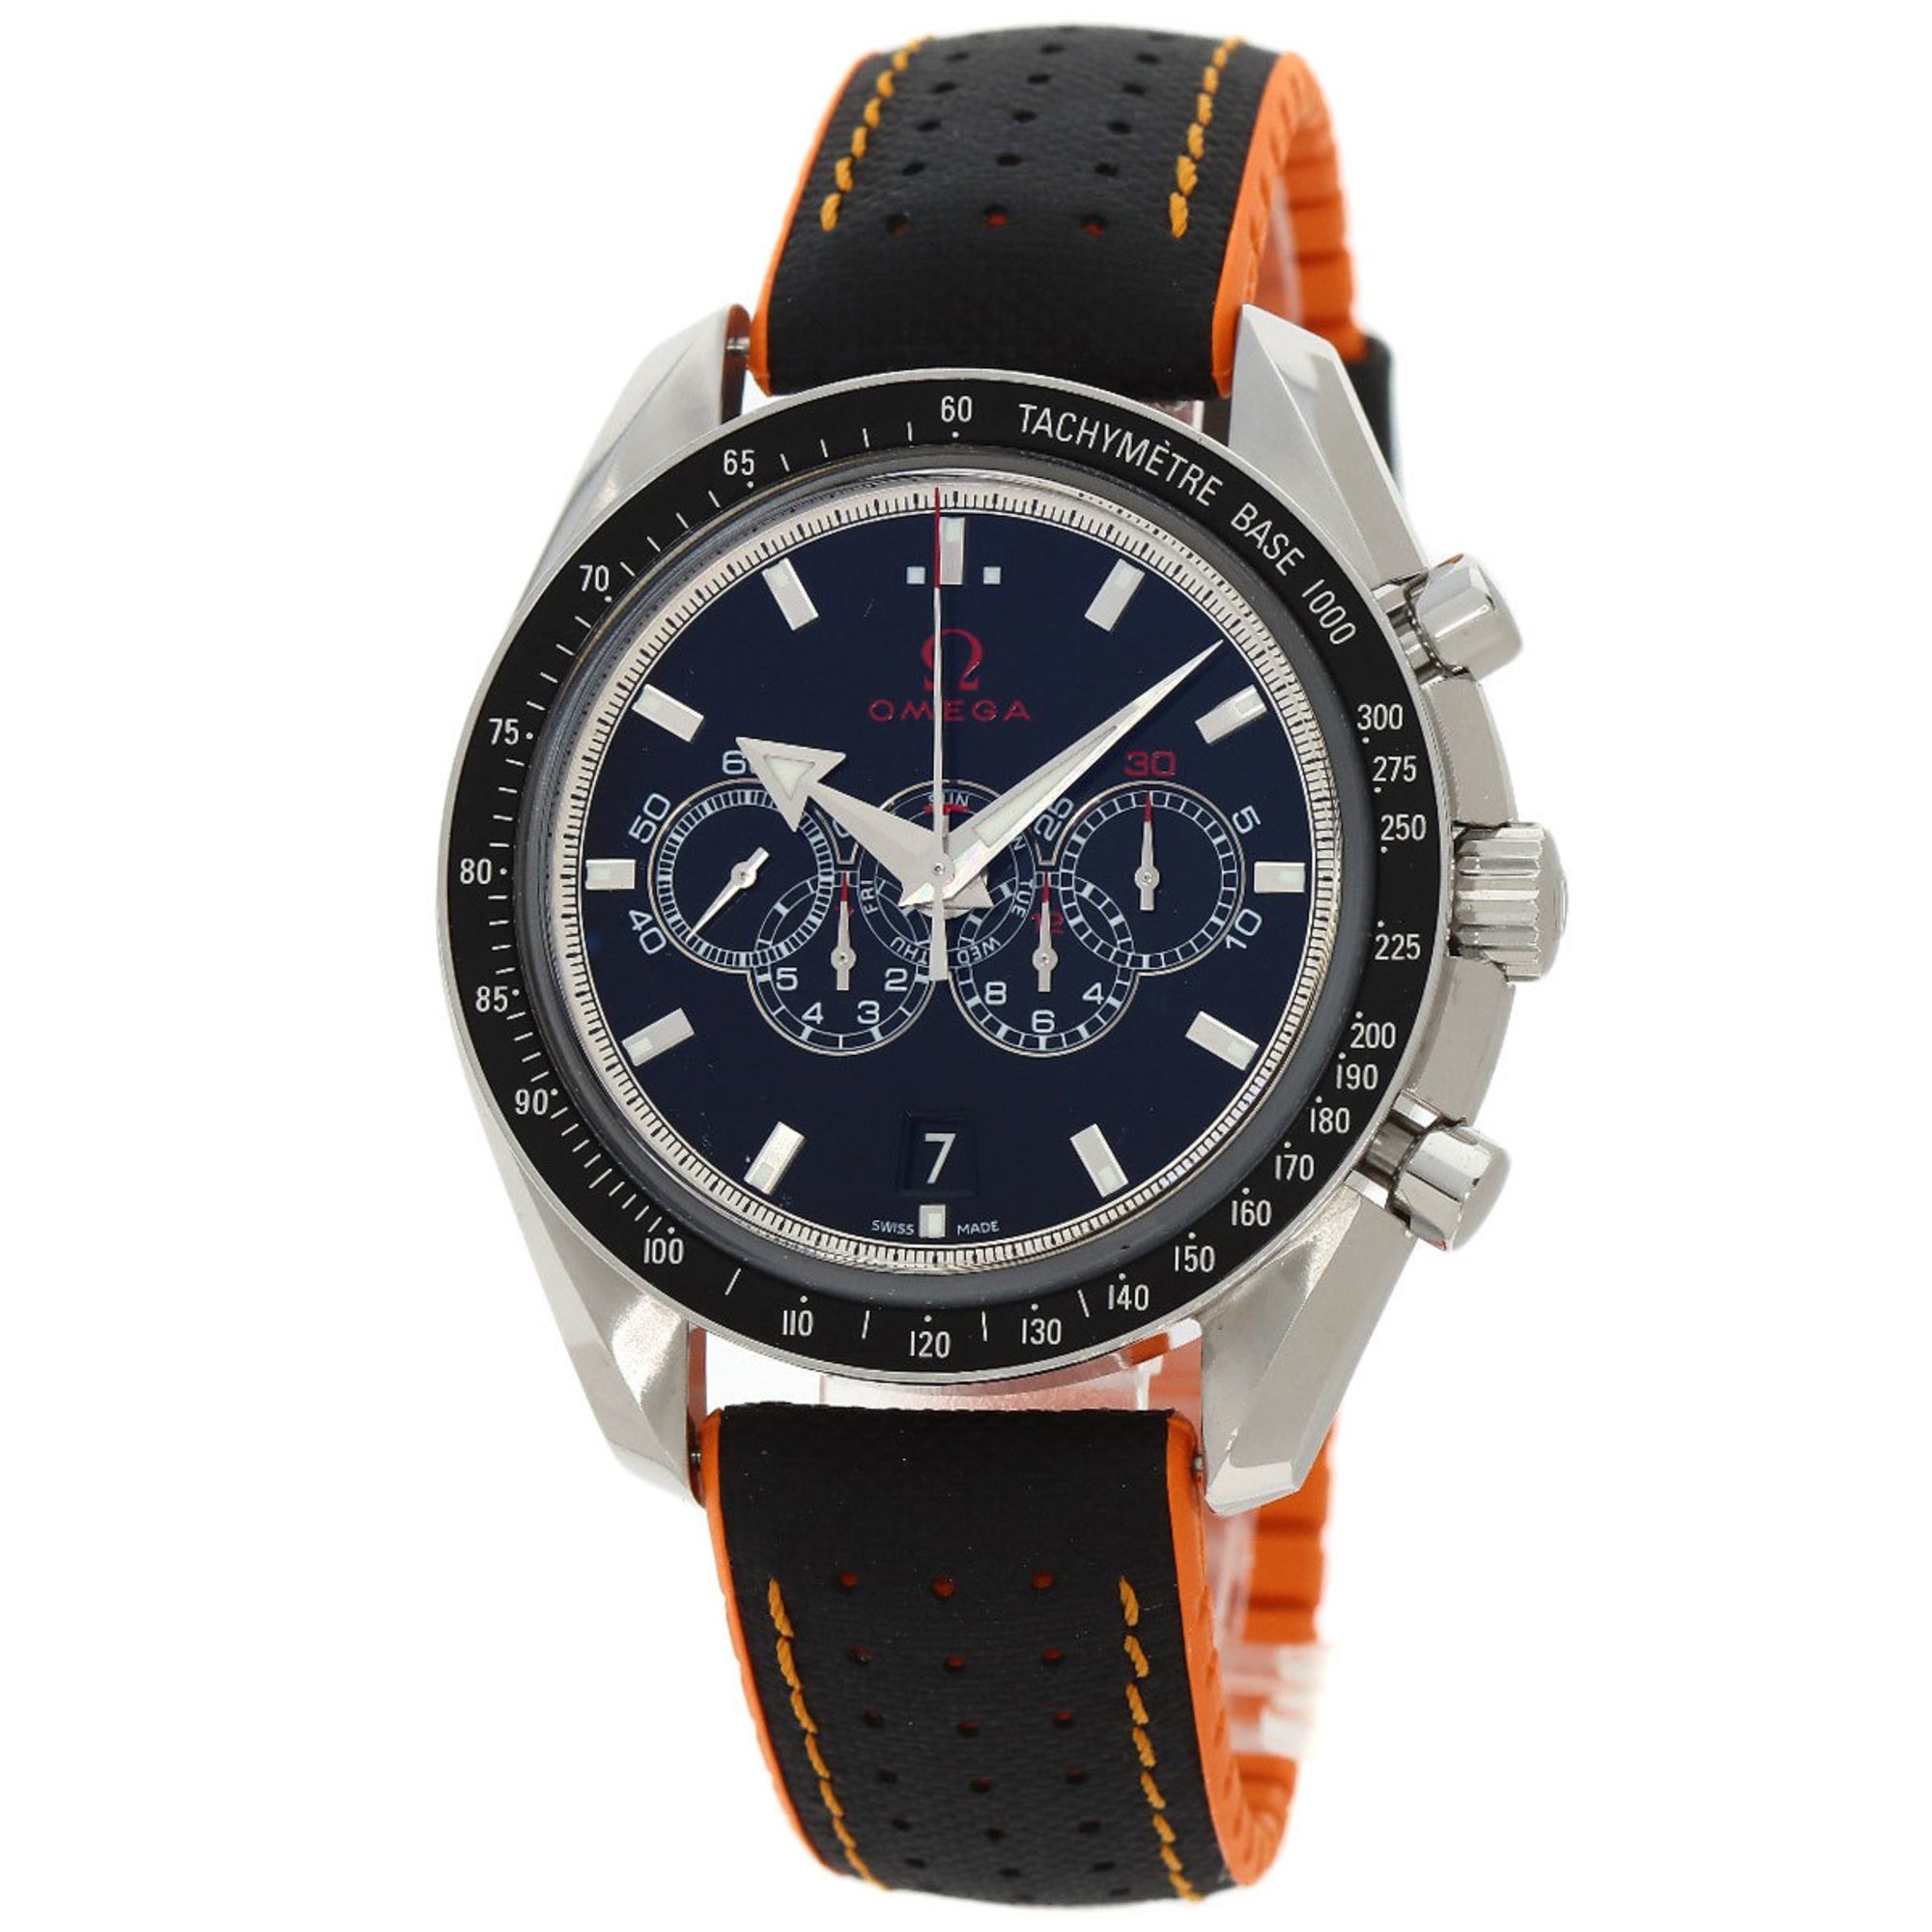 Omega 321.33.44.52.01.001 Speedmaster Olympic Collection Broad Arrow Watch Stainless Steel Rubber Men's